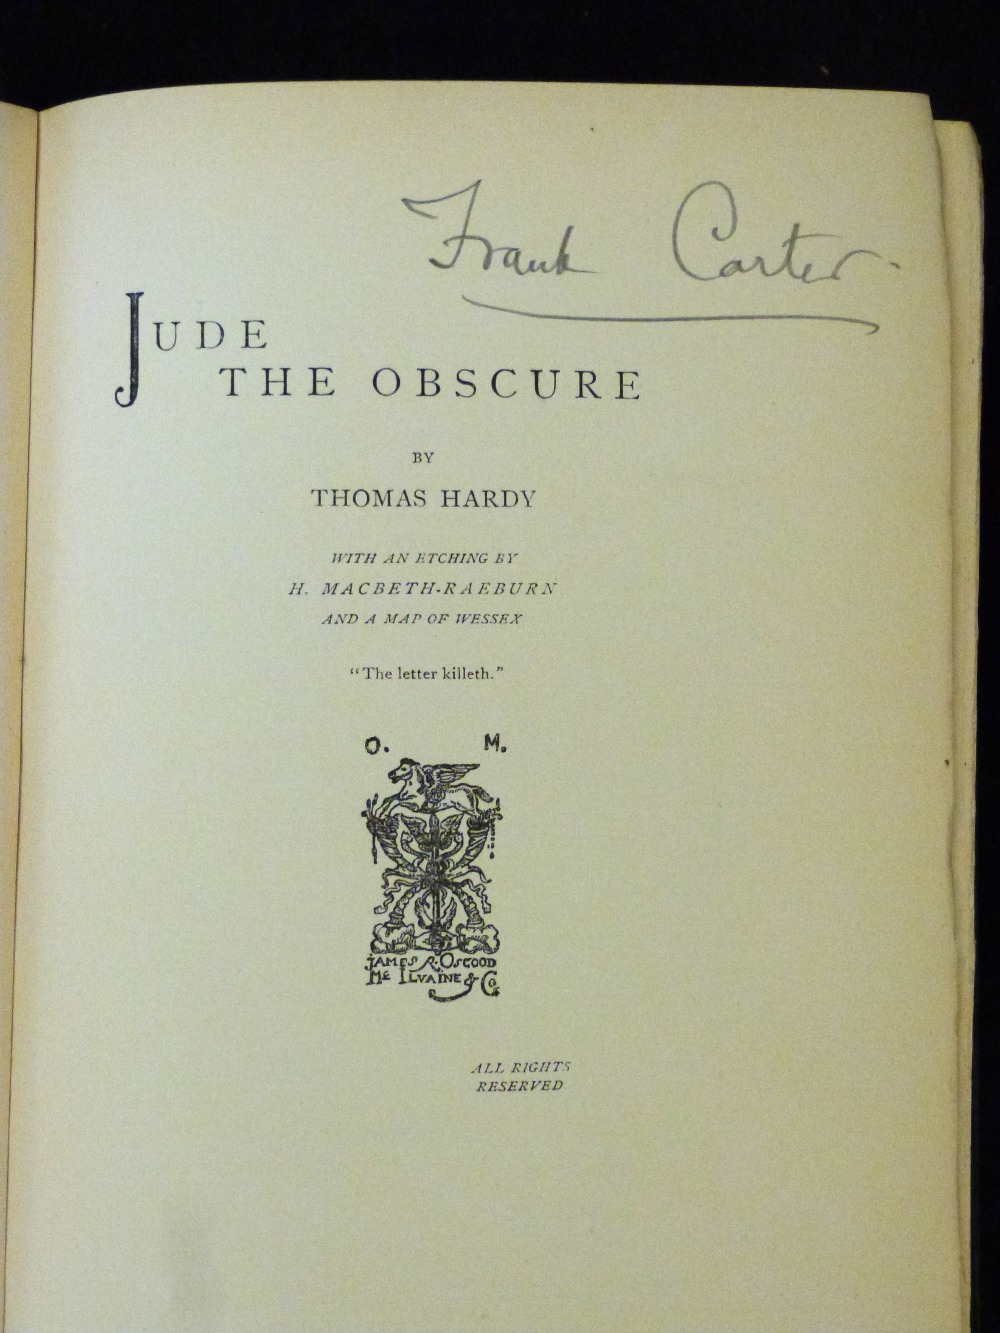 THOMAS HARDY: JUDE THE OBSCURE, London, Osgood, McIlvaine, 1896, 1st edition, mixed state, etched